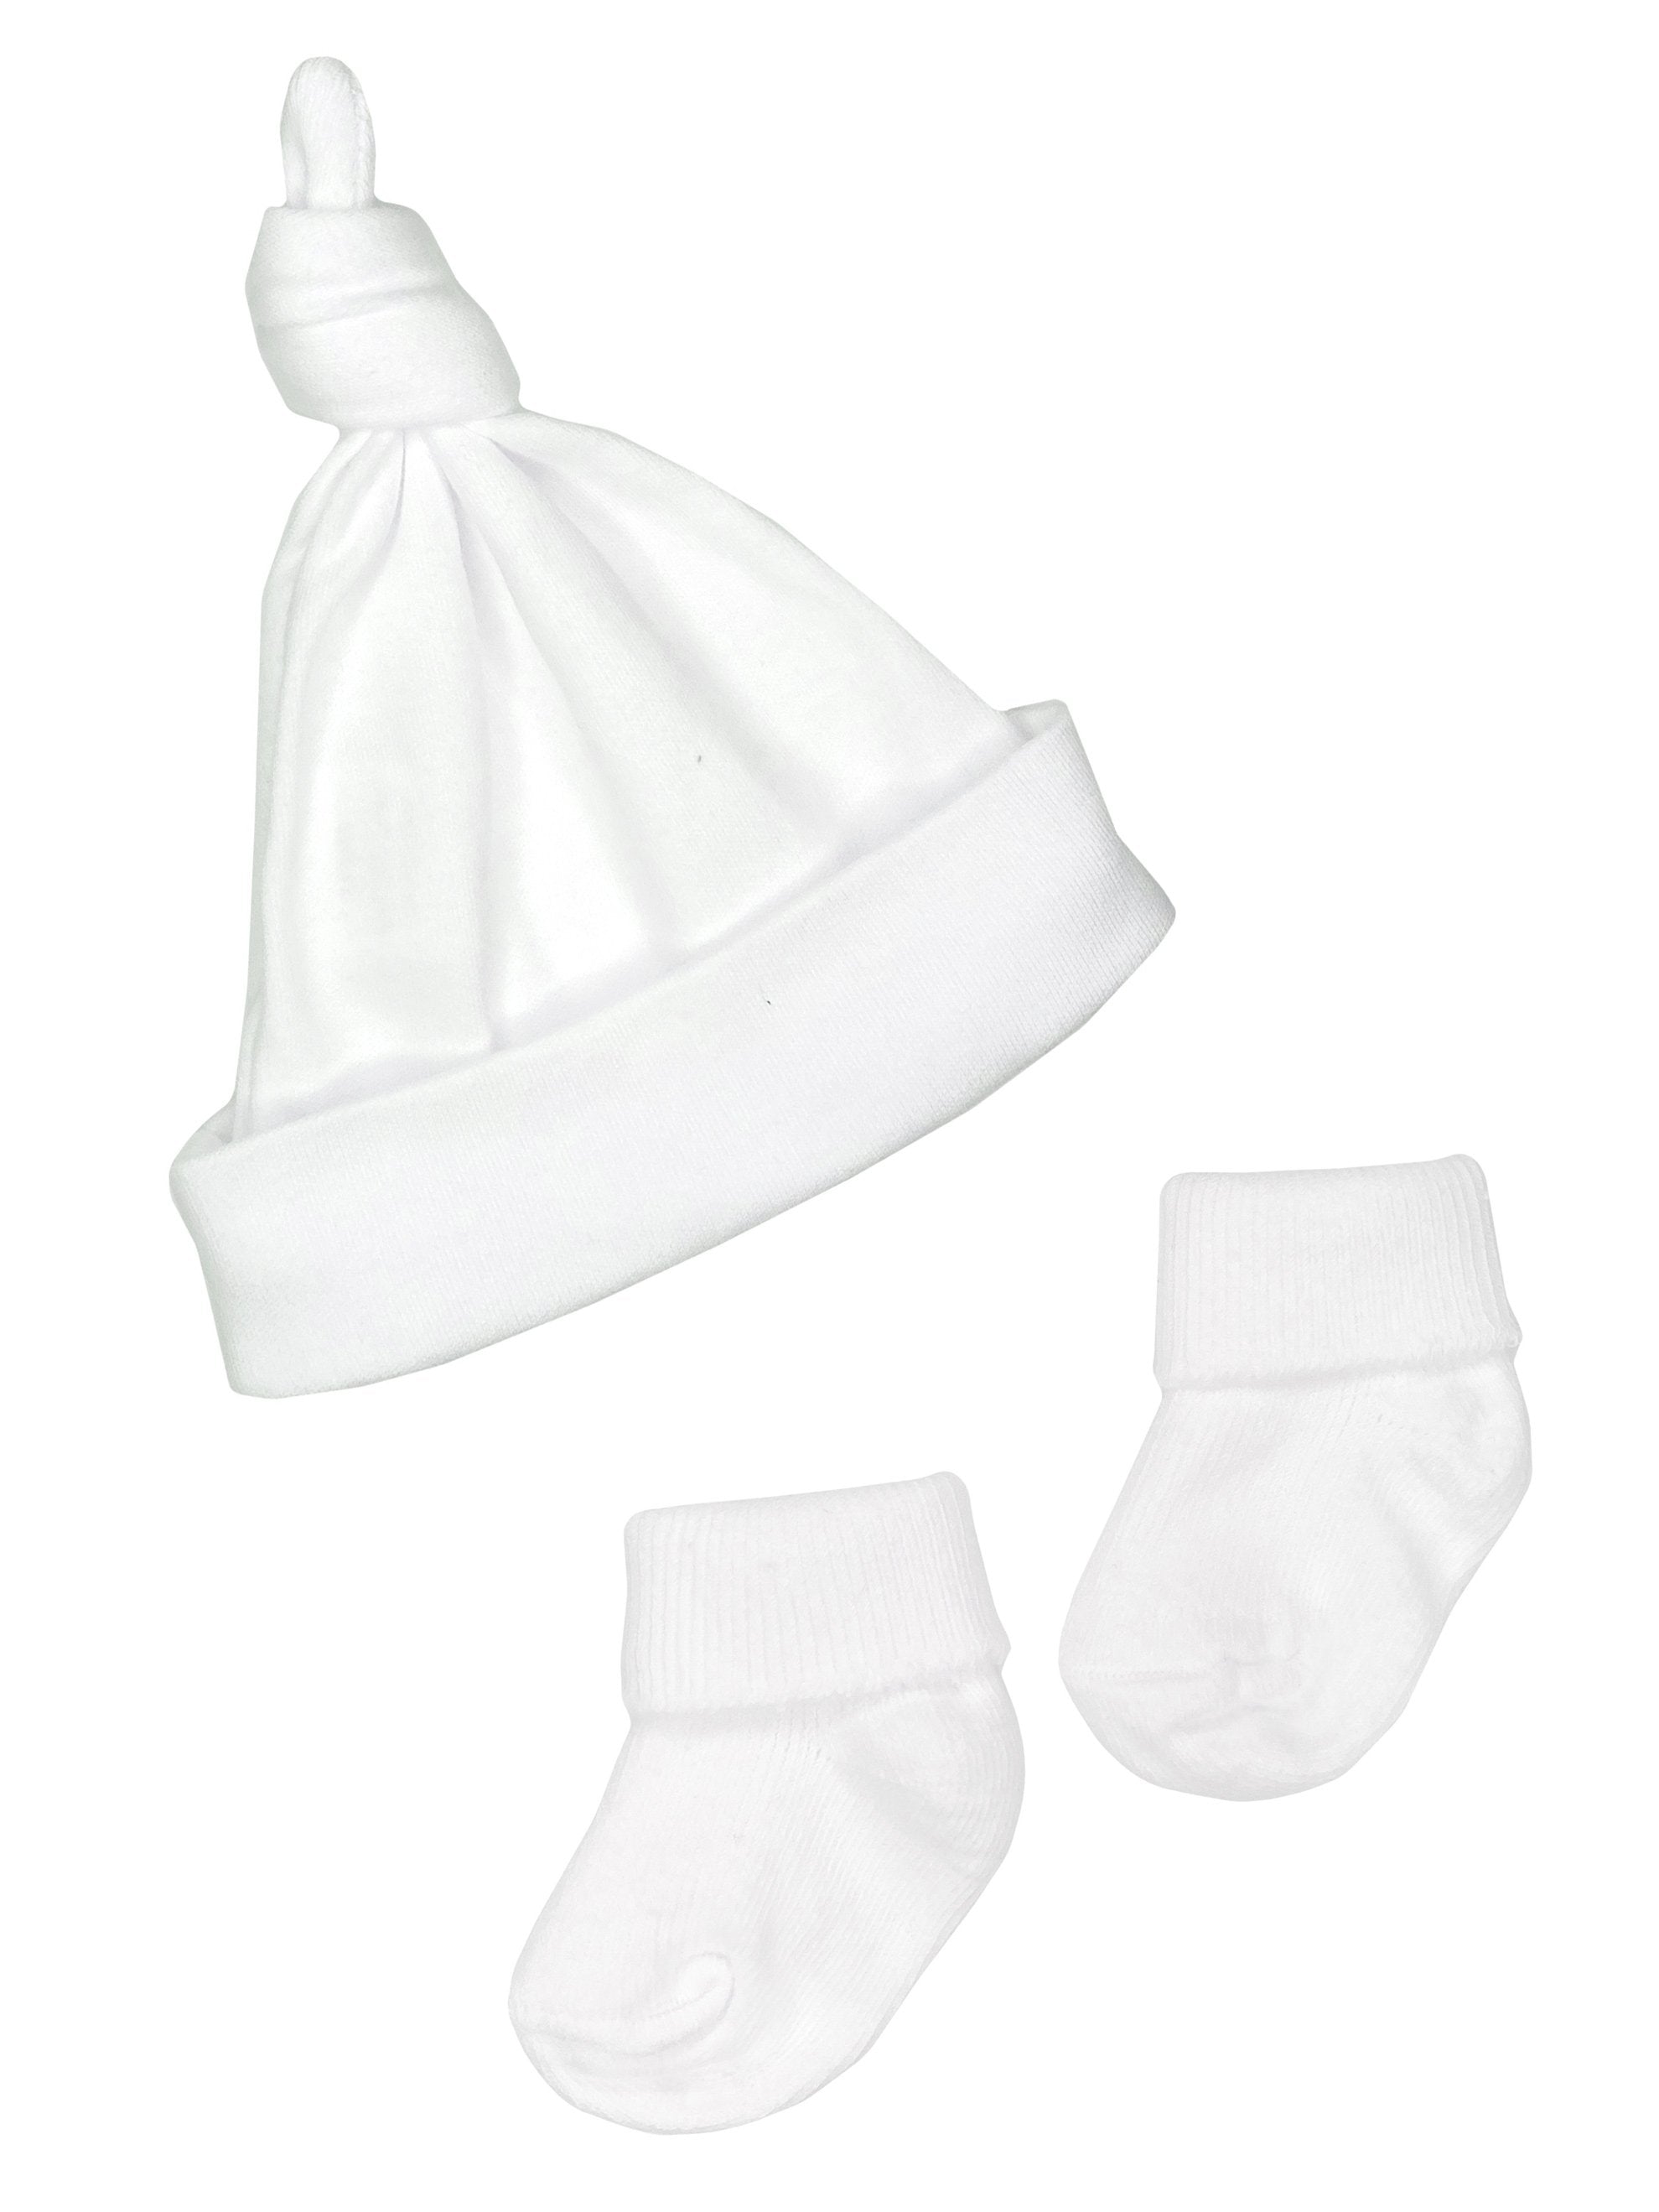 Premature Baby Knotted Hat and Socks Set - White - Hat, Mitts & Booties Set - Little Mouse Baby Clothing & Gifts